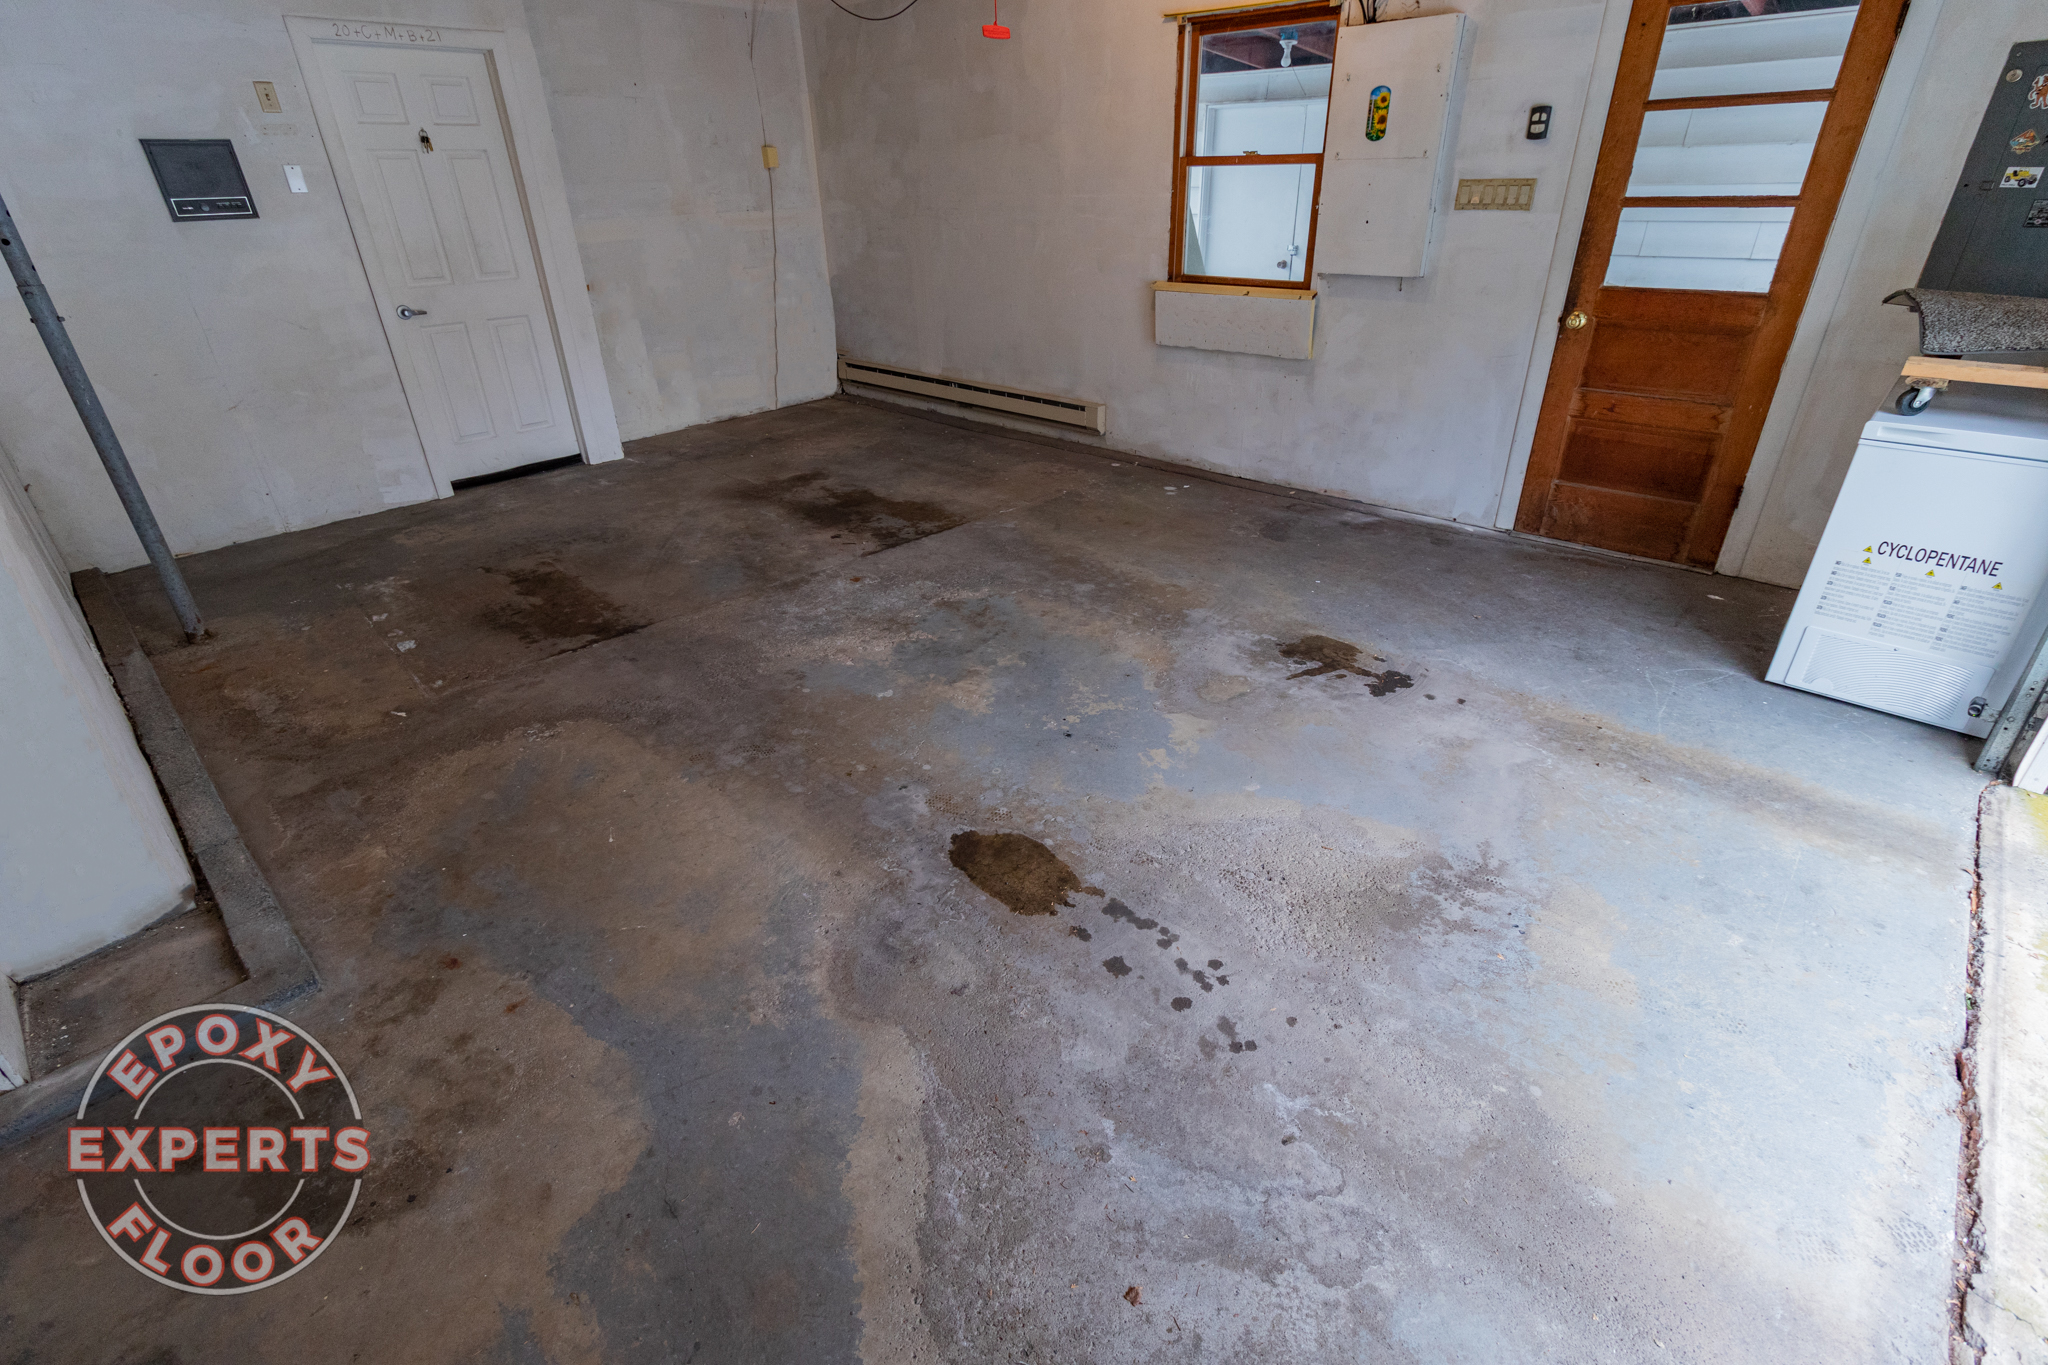 Concrete on garage with visible damage from use before epoxy floor experts repair